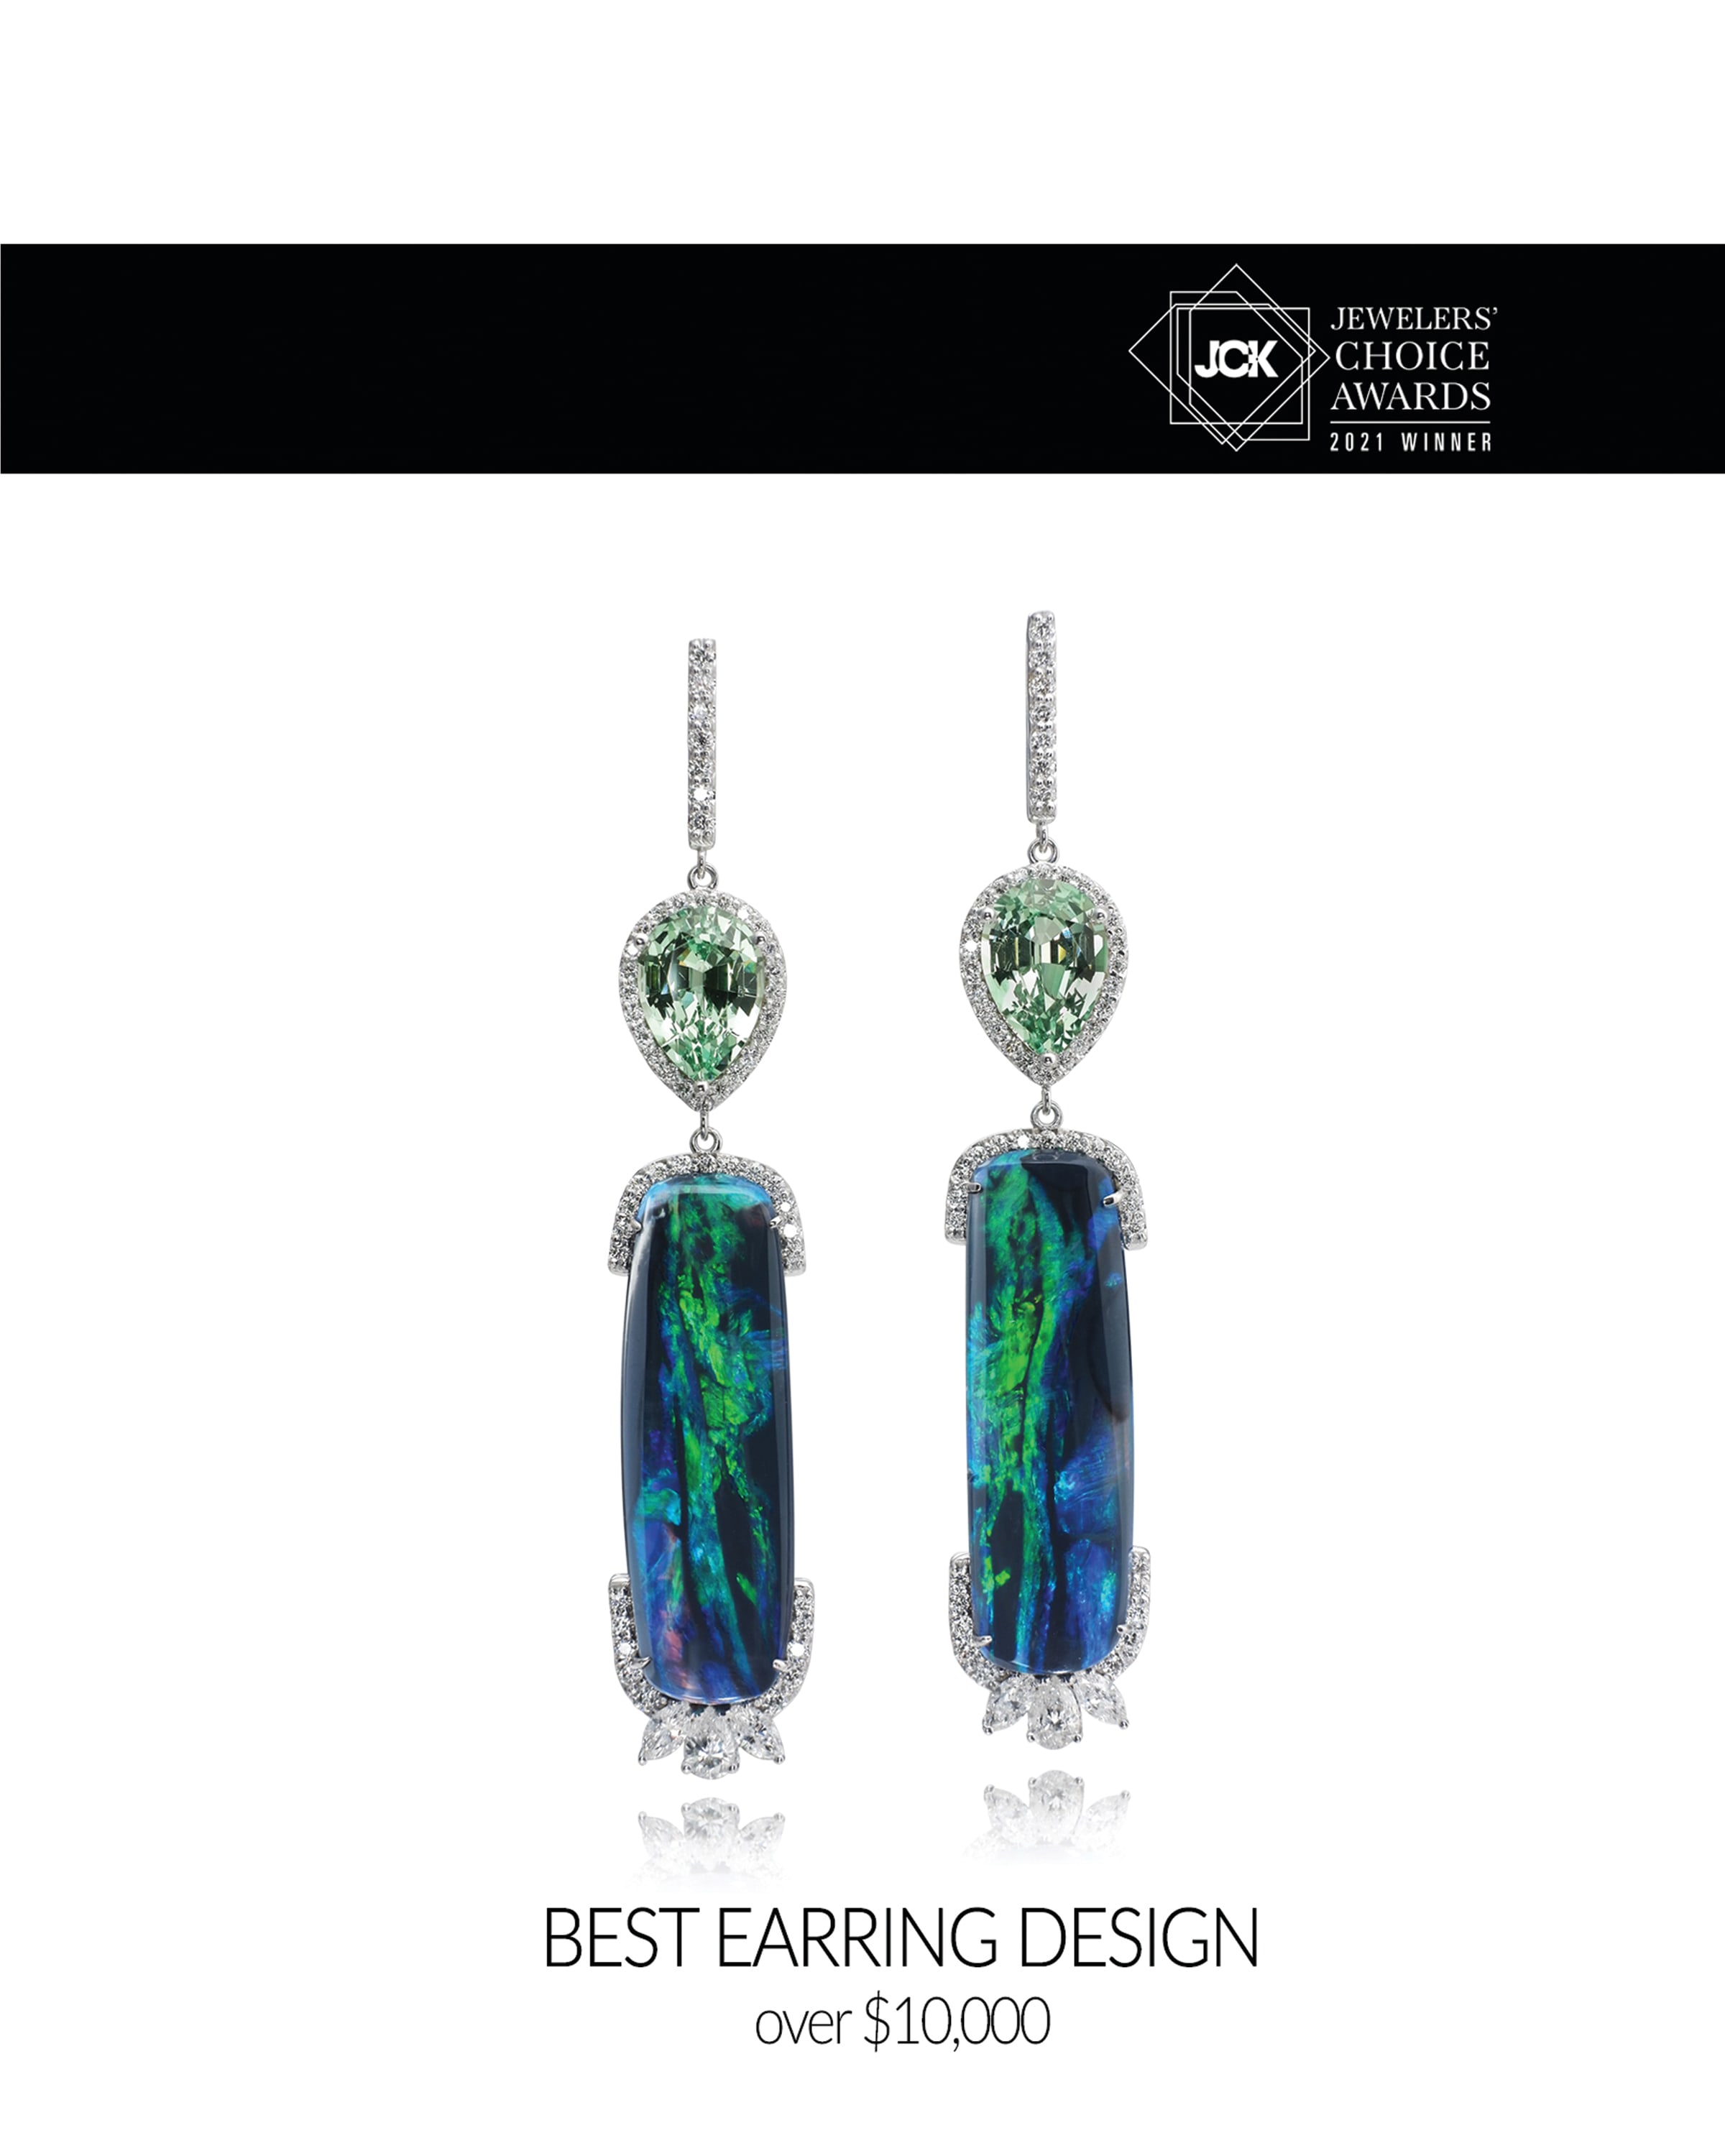 2021 JCK BEST EARRING DESIGN - over $10,000  |

18.90 cts of perfectly matched Australian Black Opals paired beautifully with 4.33 carats of Mint Garnet. Surrounded by 1.72 ct tw of diamonds and handcrafted in 18kt white gold. Made from 100% recycled gold, all gemstones are responsibly sourced and made in the USA.